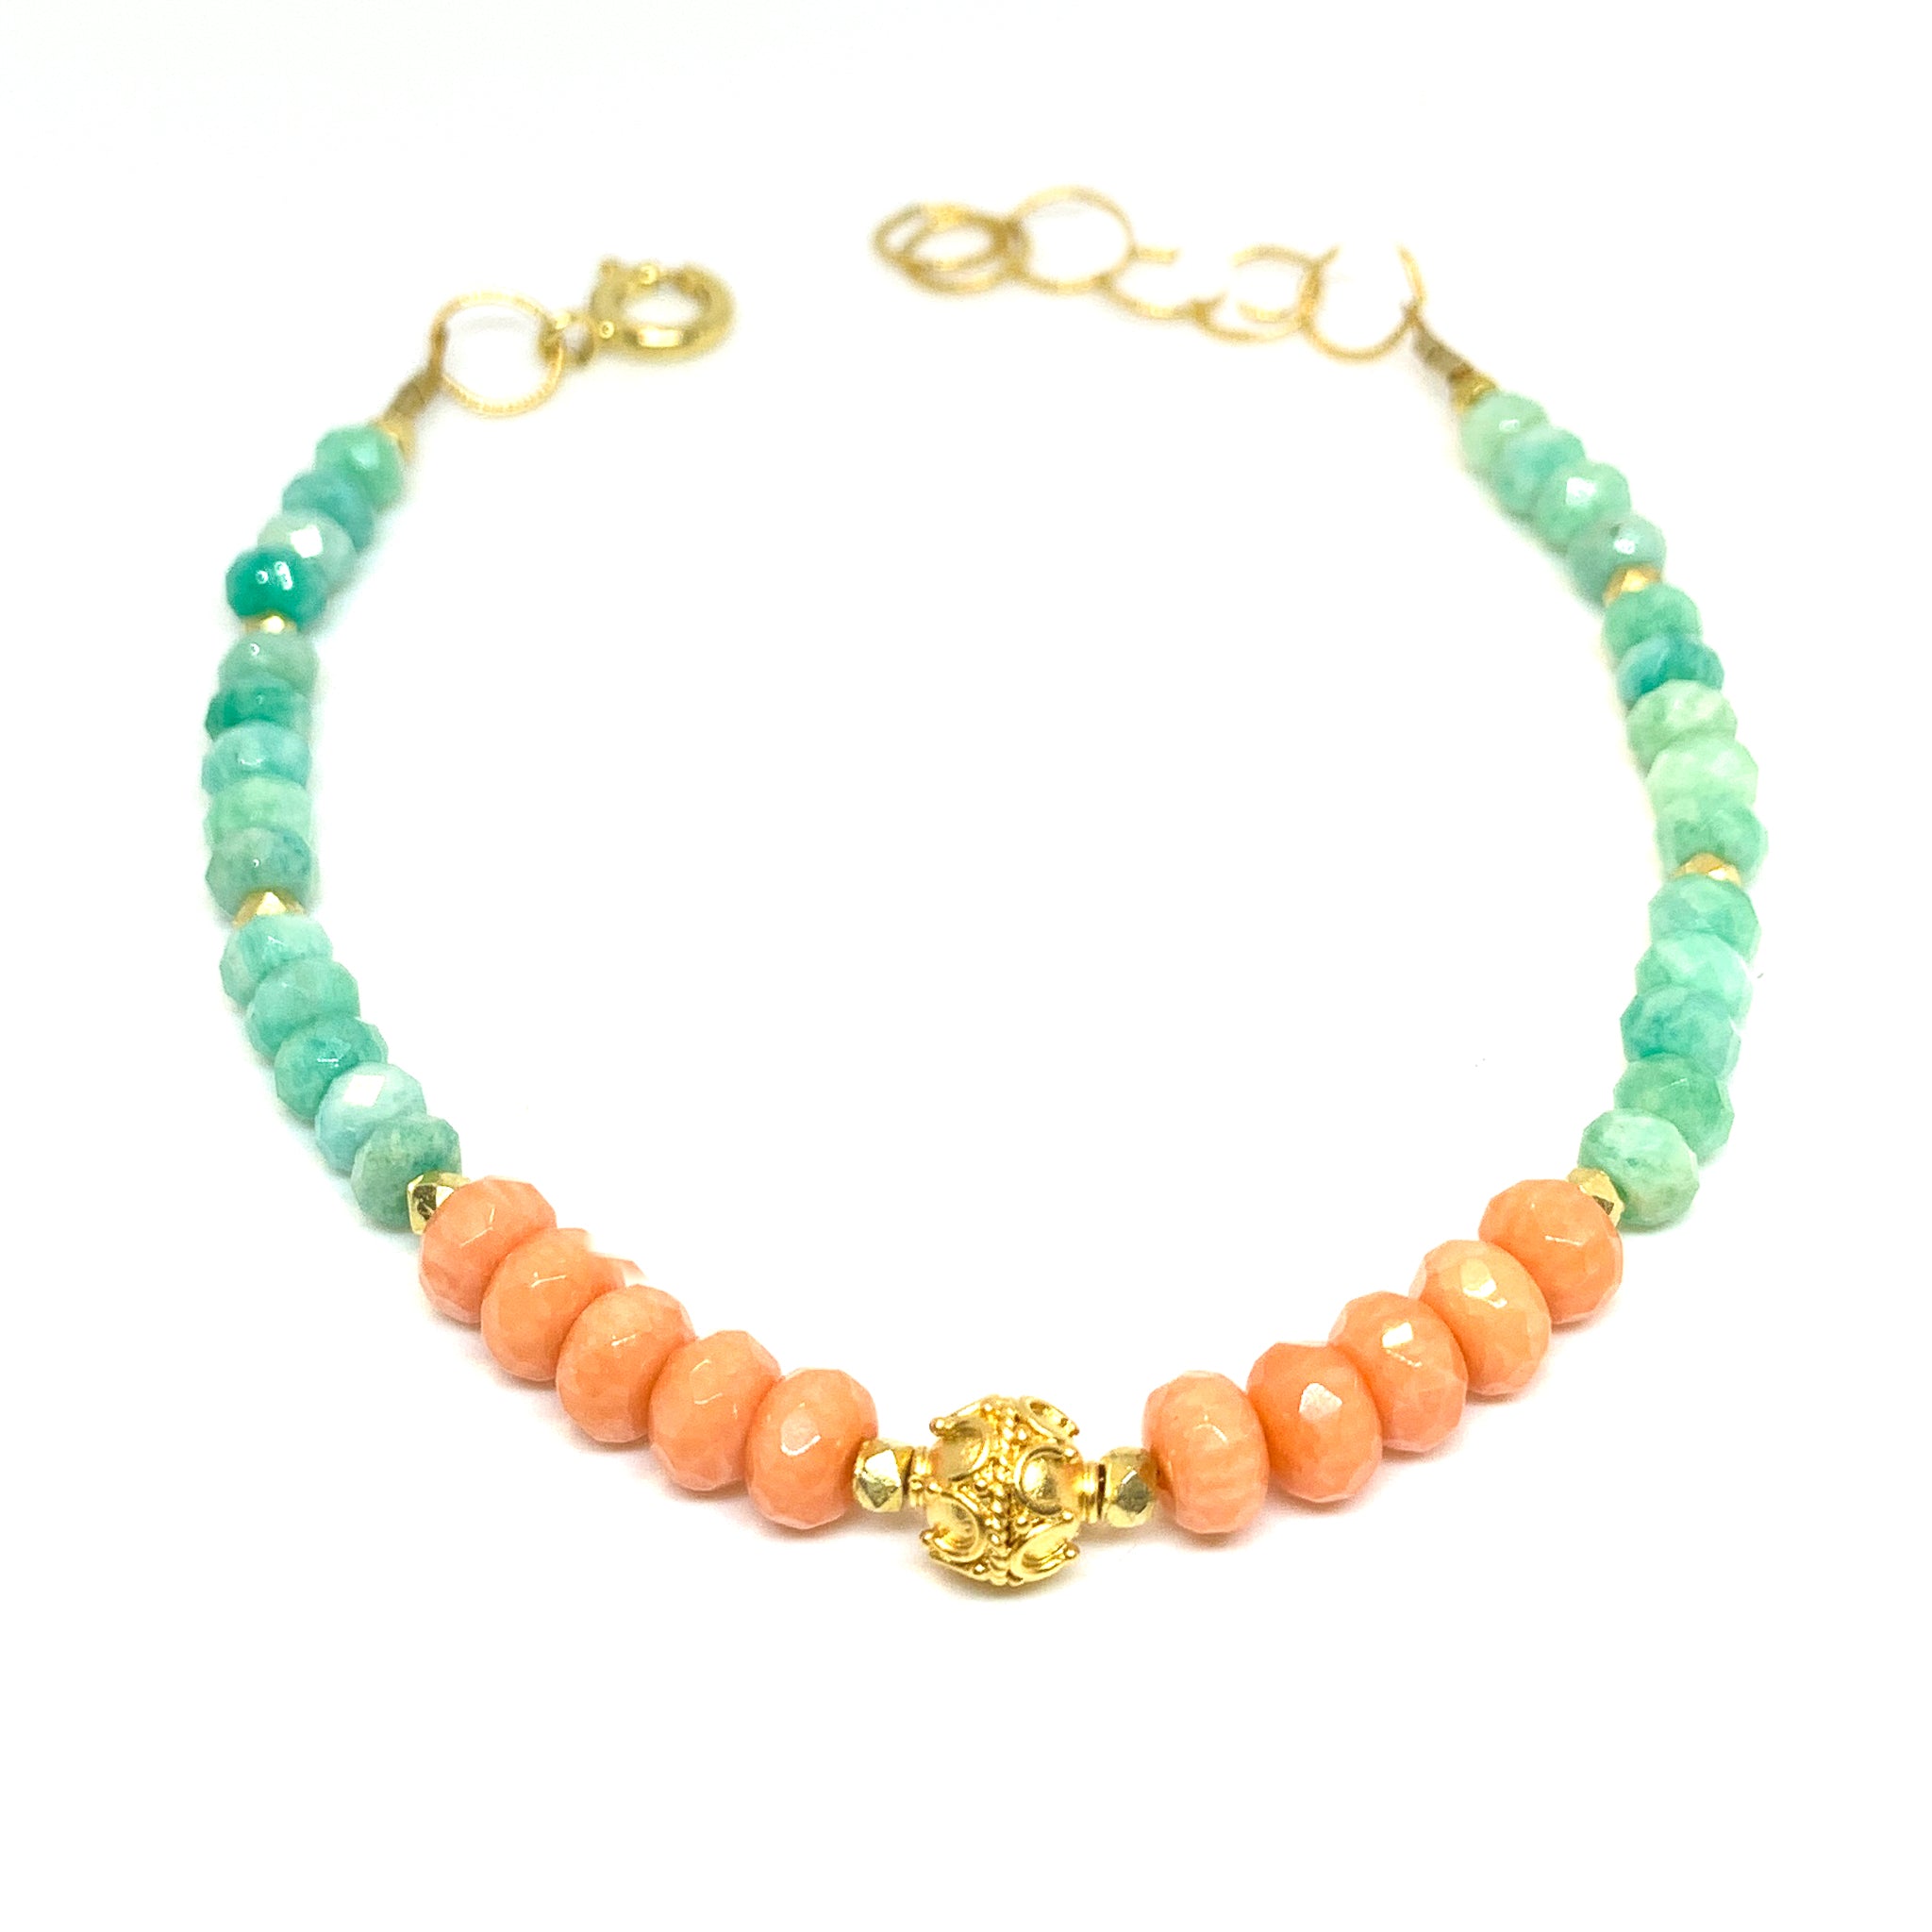 bracelet with facetted coral and amazonite with 14 karat gold fill and vermeil bead, by eve black jewelry, Hawaii